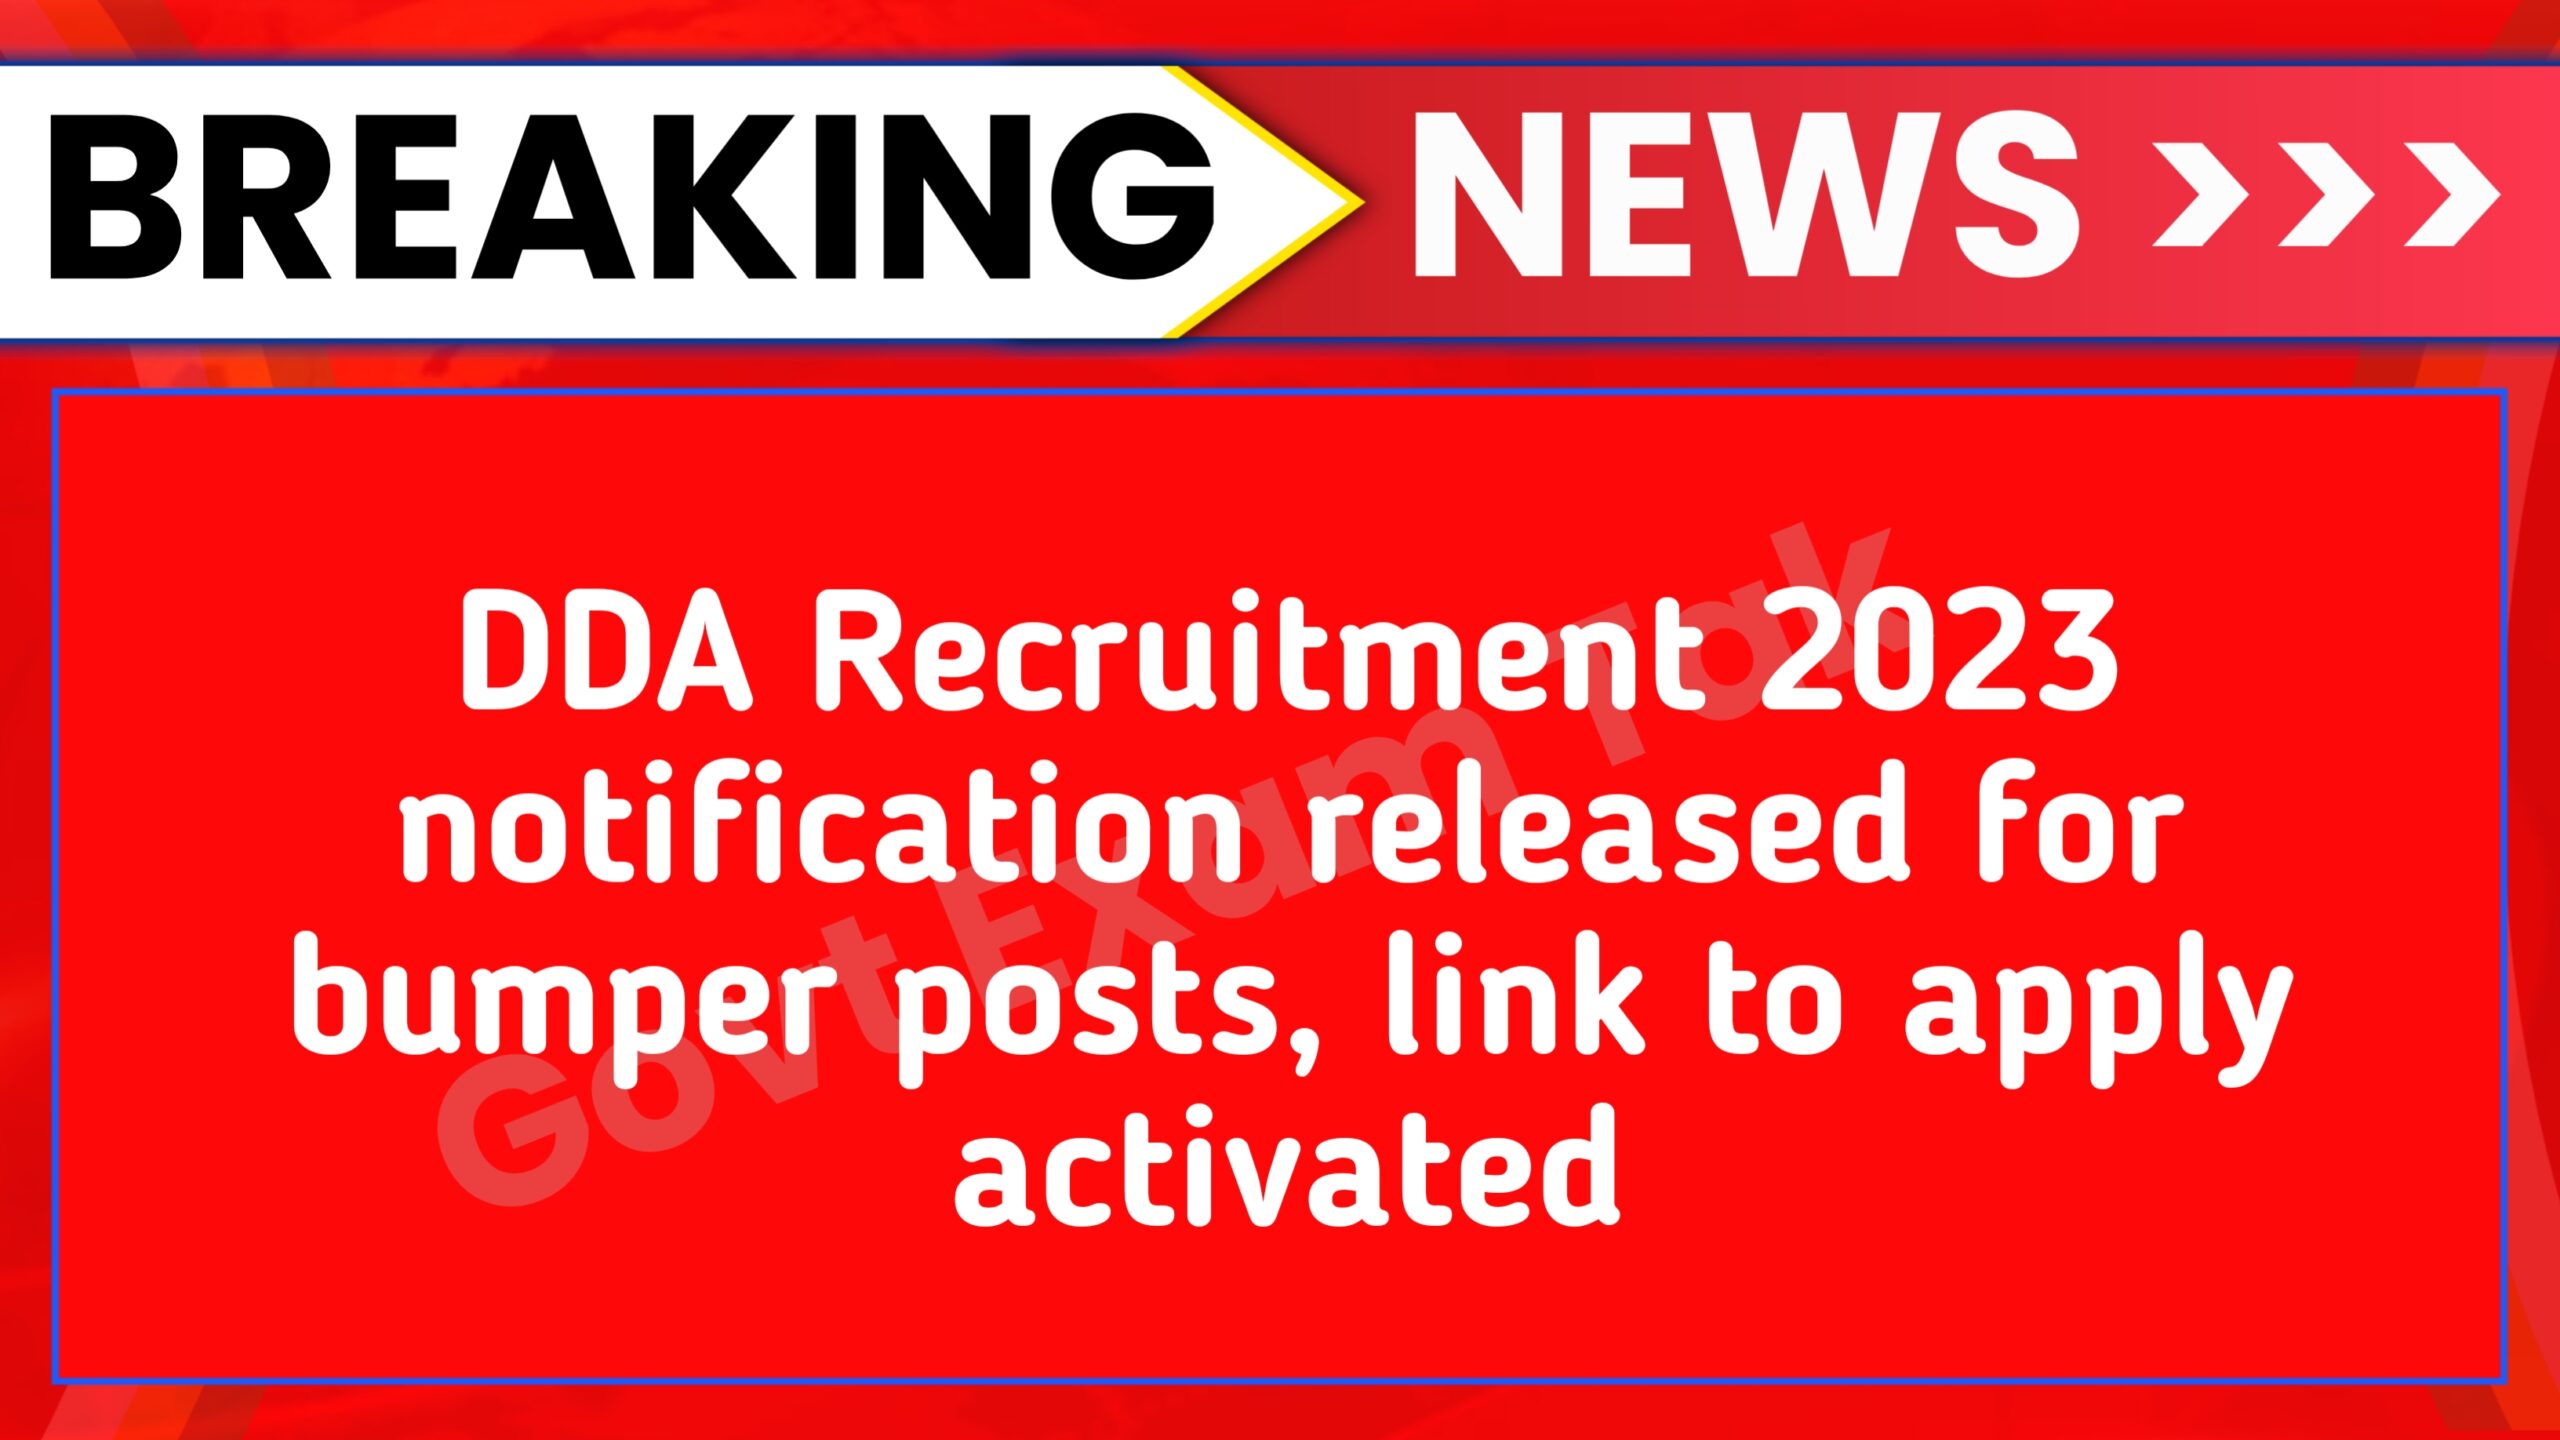 DDA Recruitment 2023 notification released for bumper posts, link to apply activated